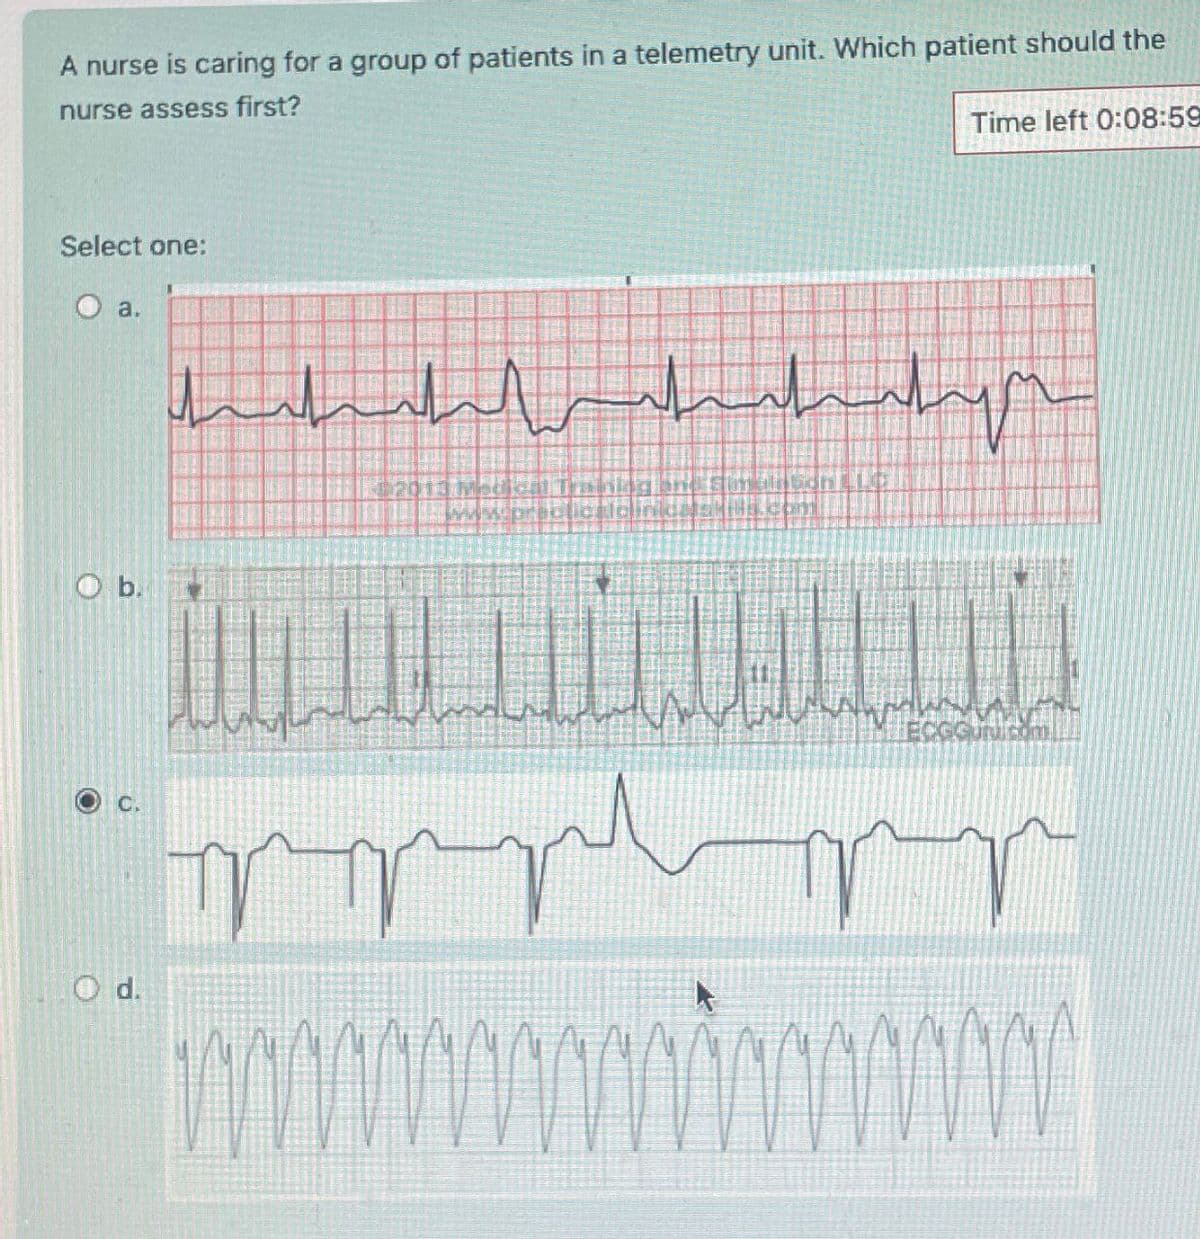 A nurse is caring for a group of patients in a telemetry unit. Which patient should the
nurse assess first?
Select one:
O a.
O b.
Od.
N
سلسل السلسلسة
Stim
www.pract foundataks.com
Time left 0:08:59
wwwwwww
ww